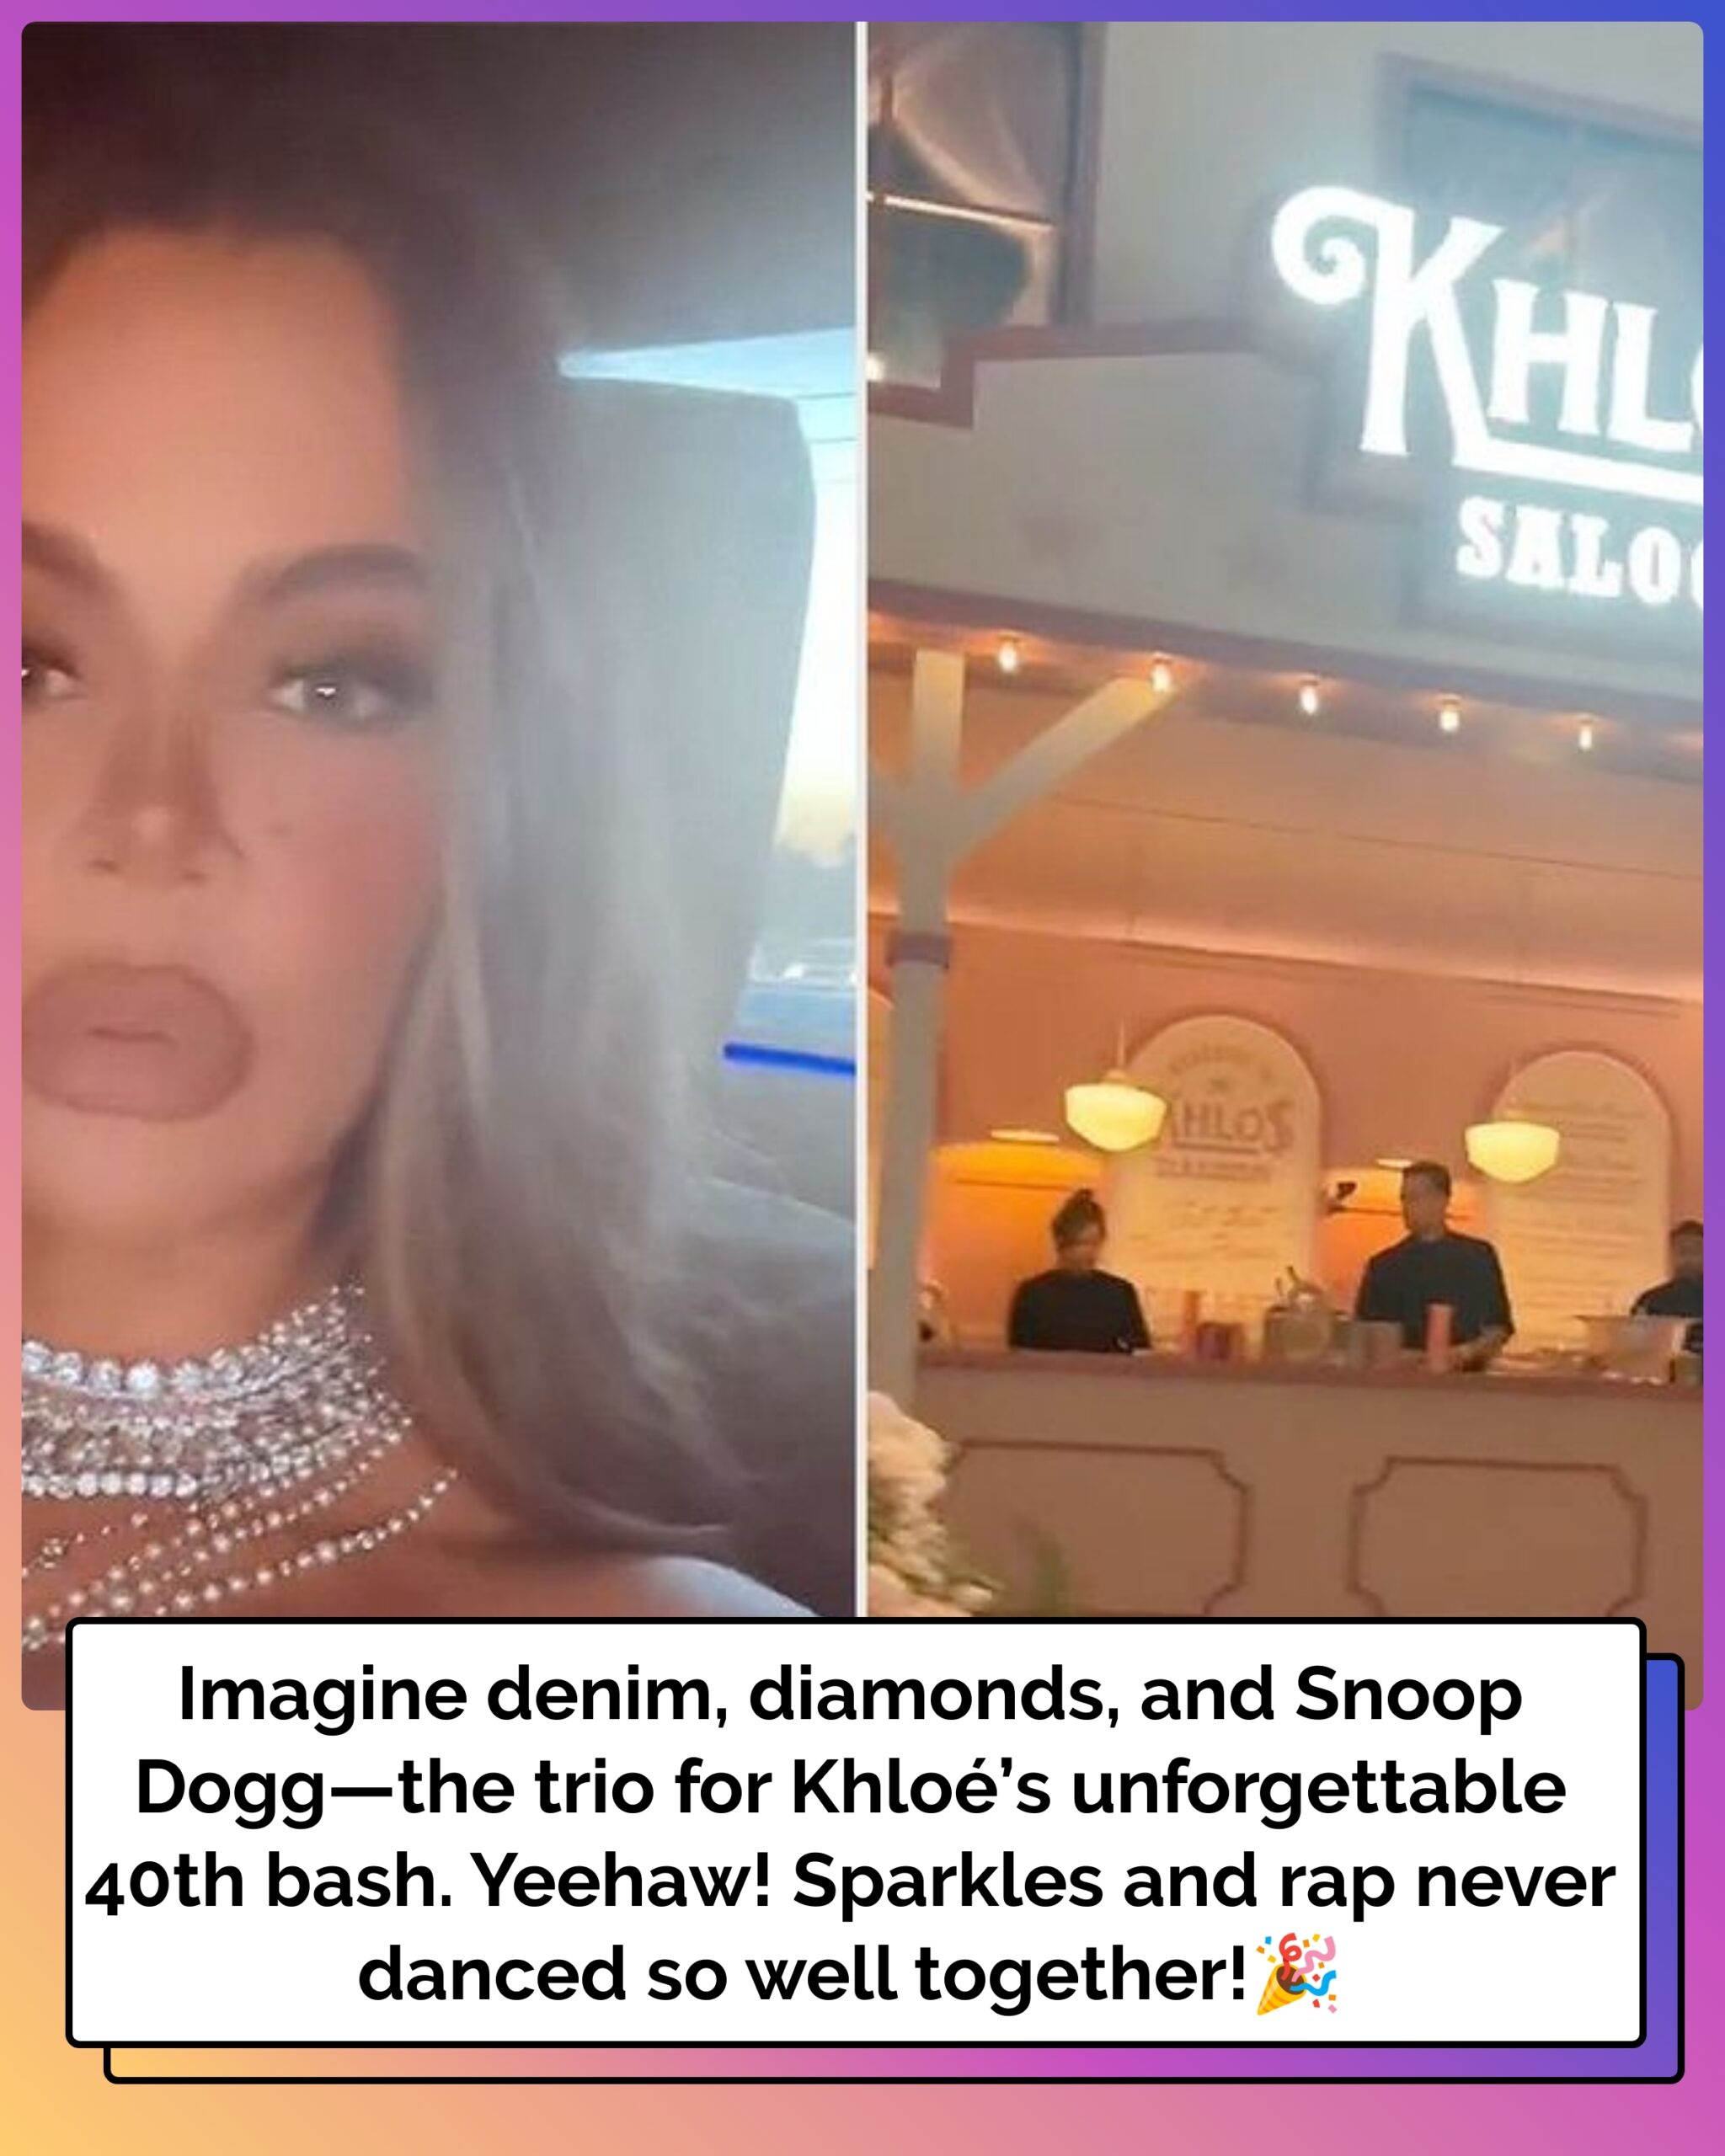 Khloé Kardashian Celebrates 40th Birthday with a Saloon-Themed Party Featuring Denim, Diamonds and Snoop Dogg